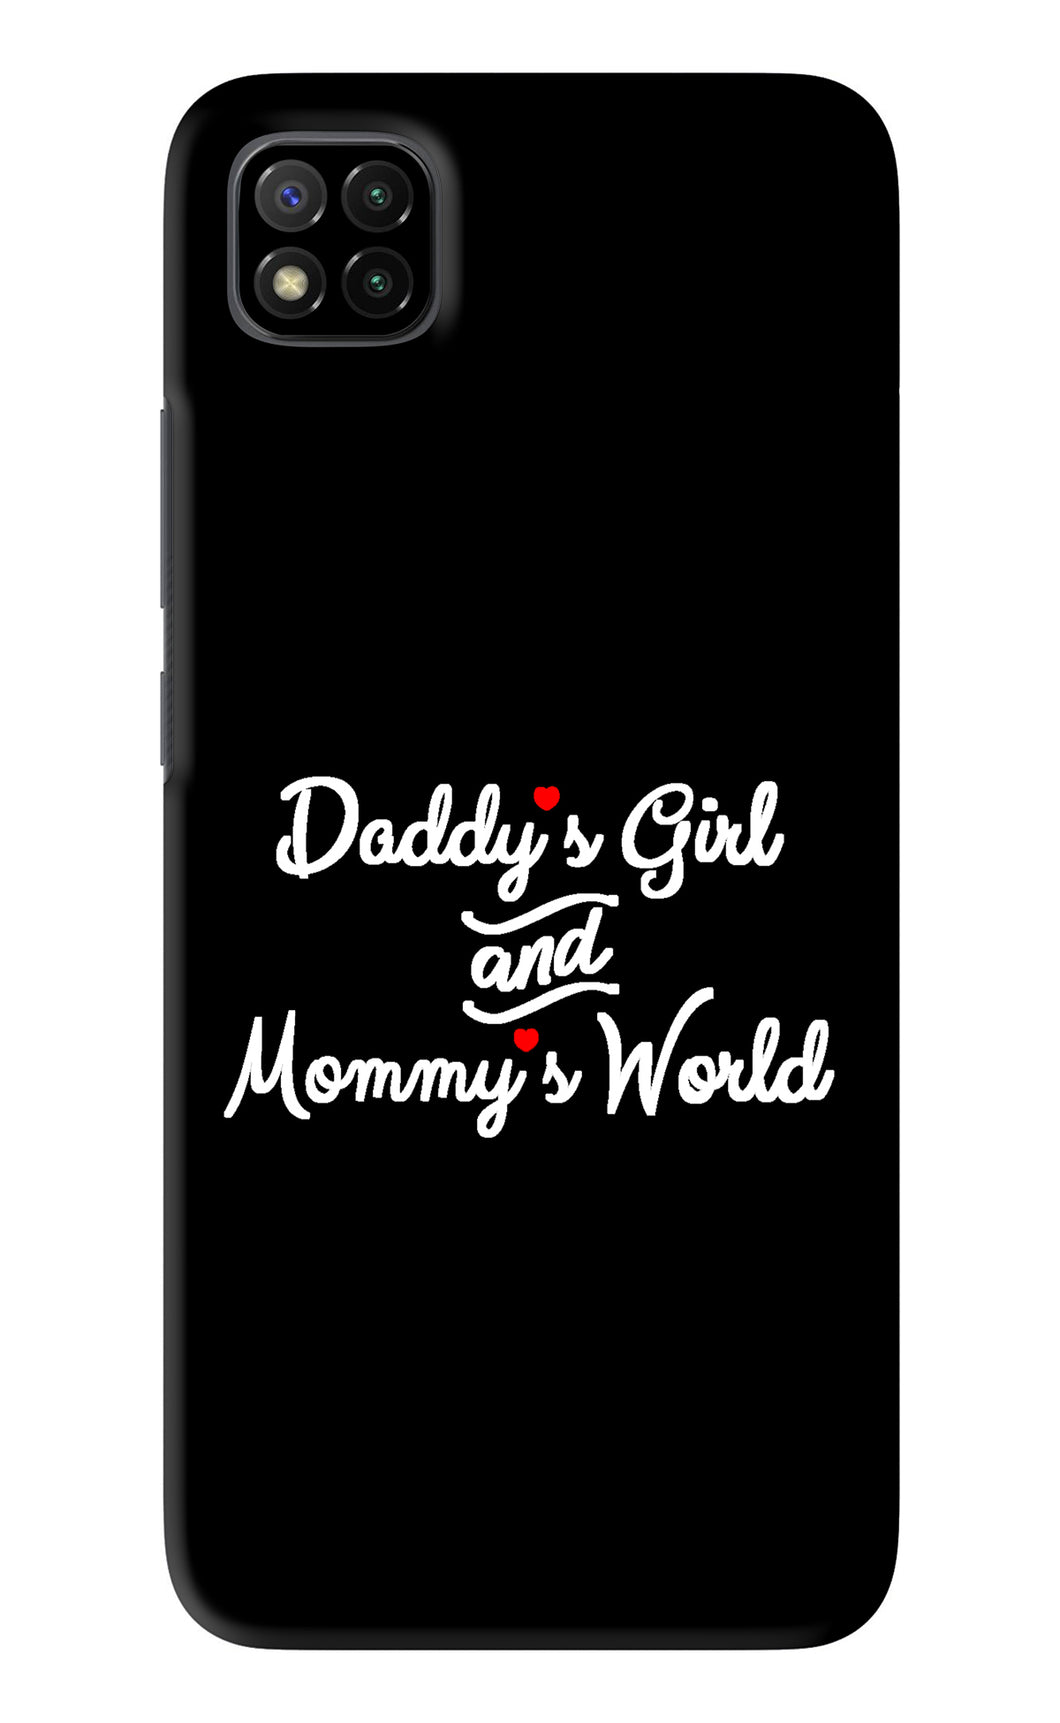 Daddy's Girl and Mommy's World Poco C3 Back Skin Wrap